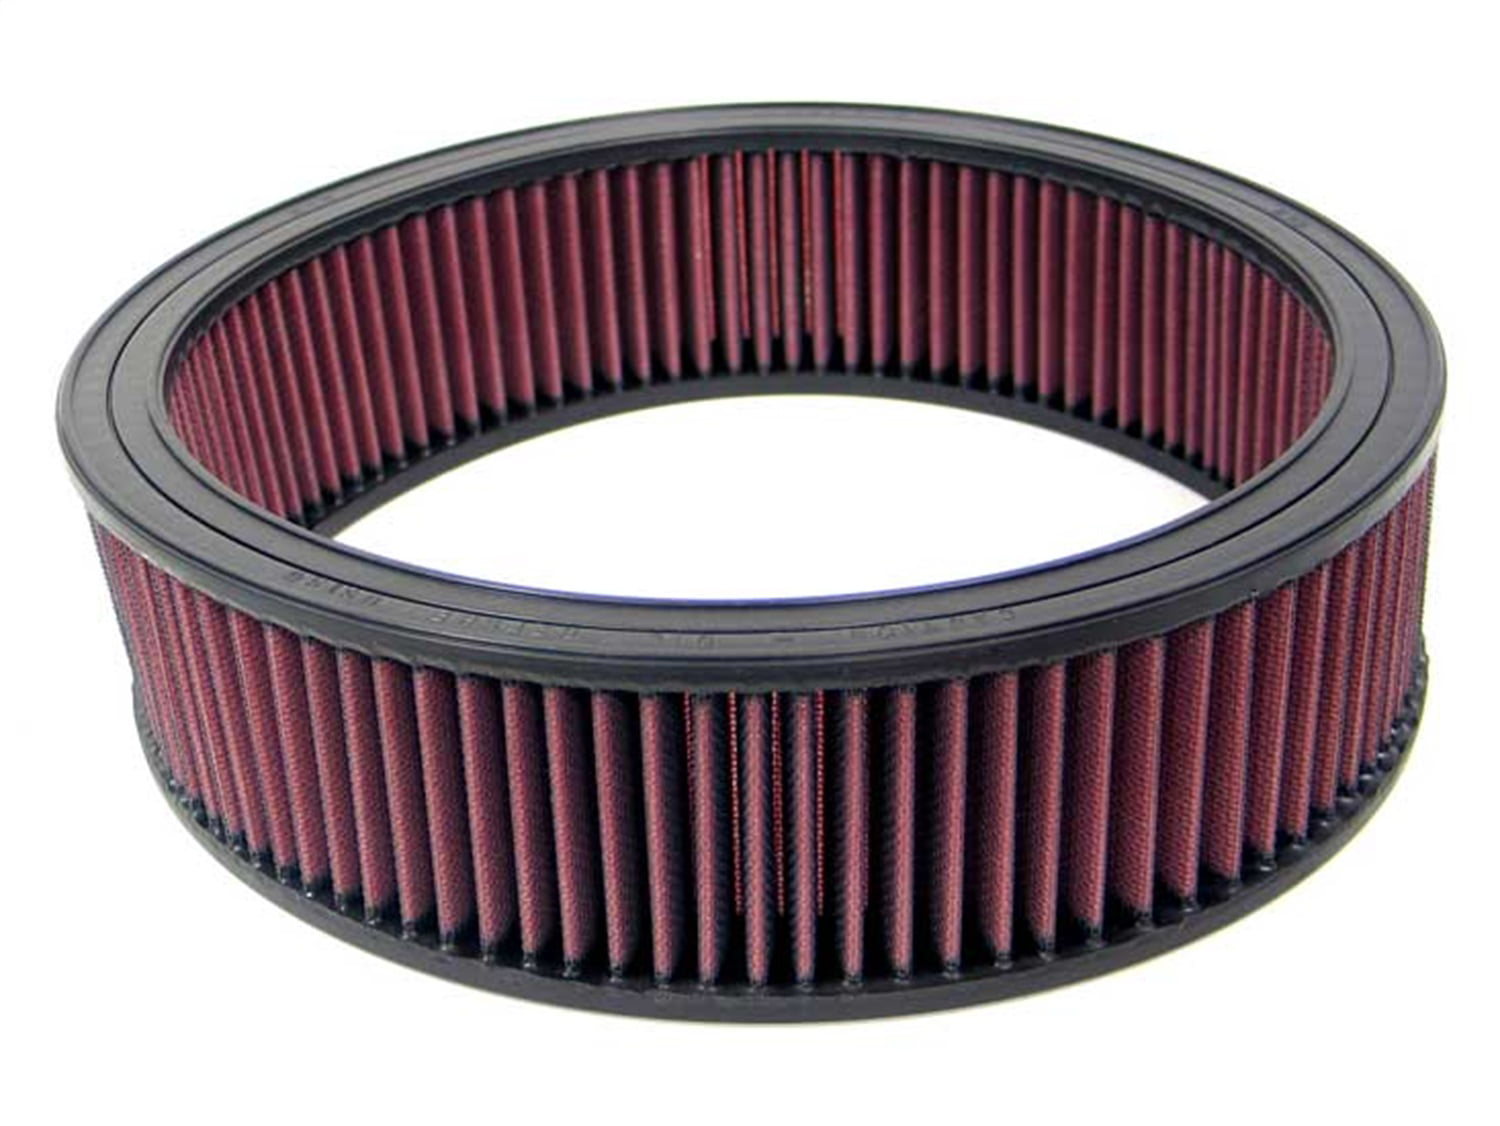 K&N Replacement Air Filter for Dodge Ram 2500 B2500 B1500 E-1100